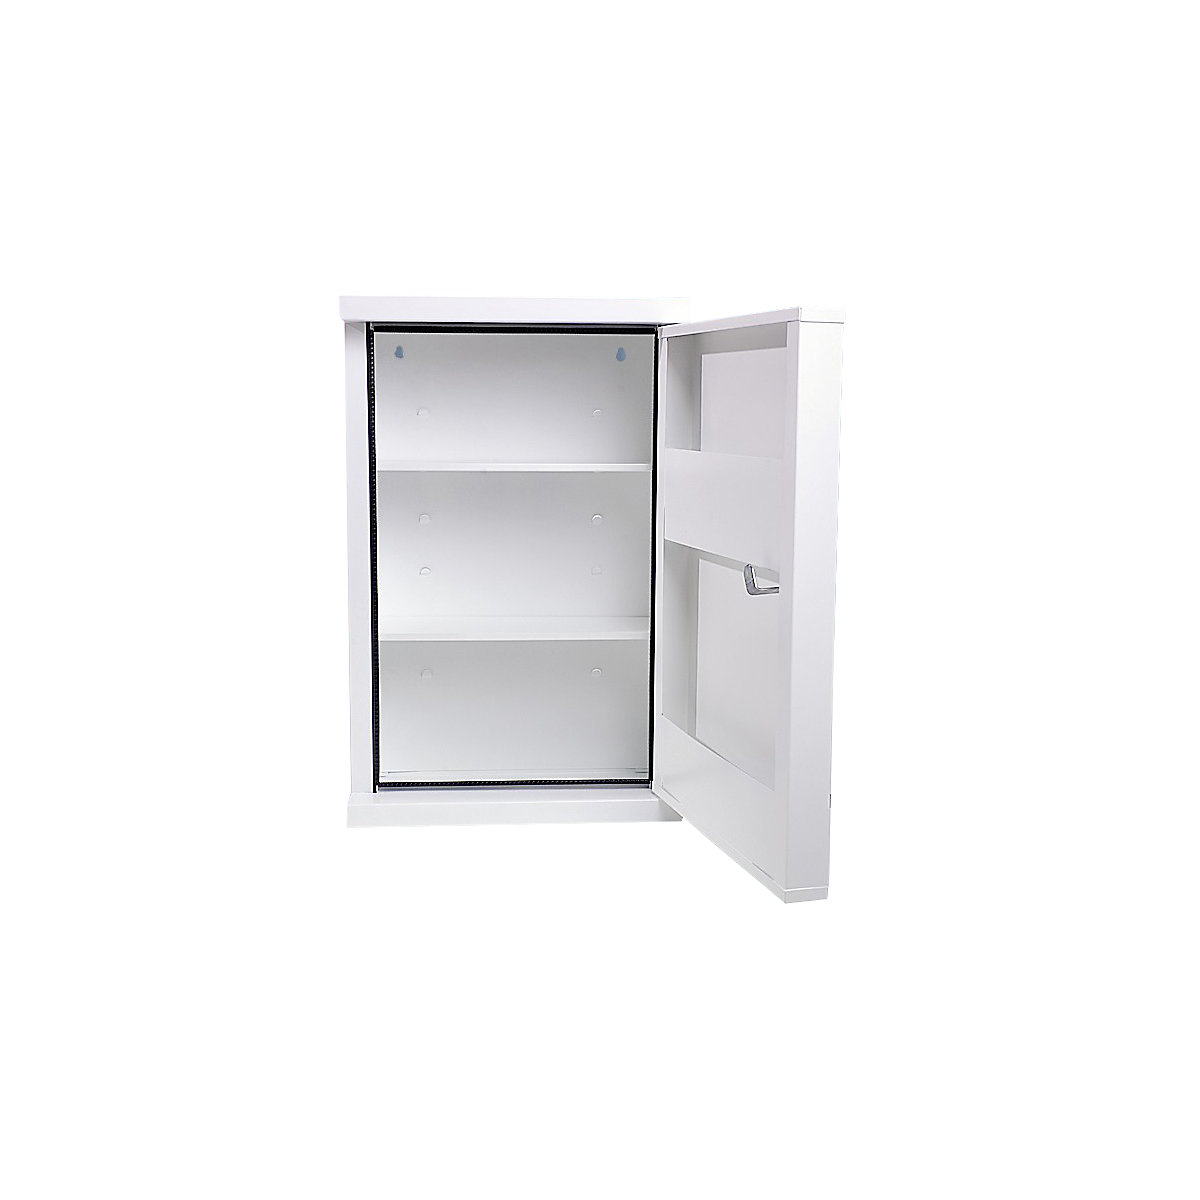 SÖHNGEN – First aid cupboard, DIN 13169, single door, white, HxWxD 560 x 360 x 200 mm, without contents